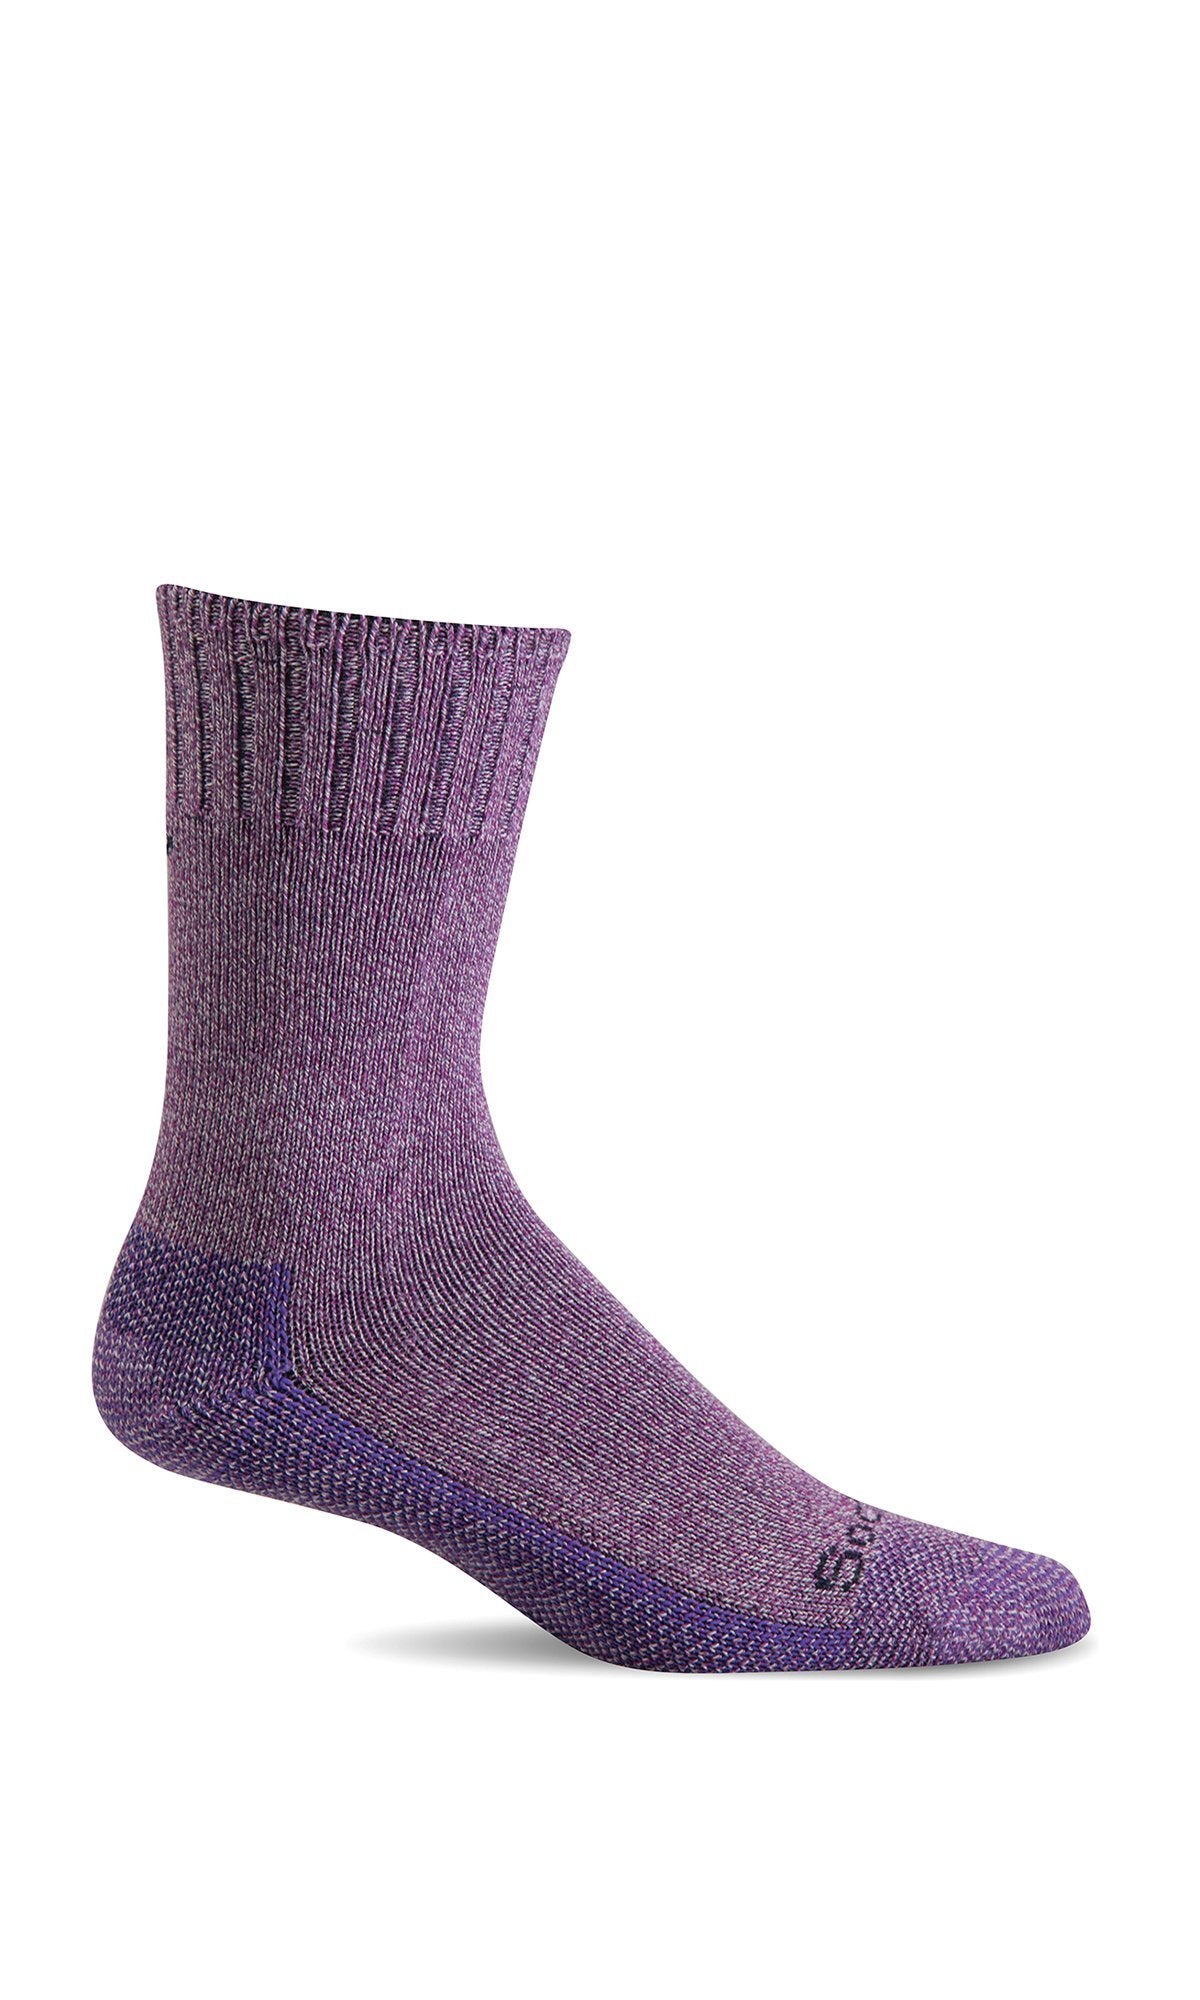 Pamper and protect your feet in Sockwell's Big Easy relaxed fit non-binding diabetic-friendly merino wool socks in soothing bark tones